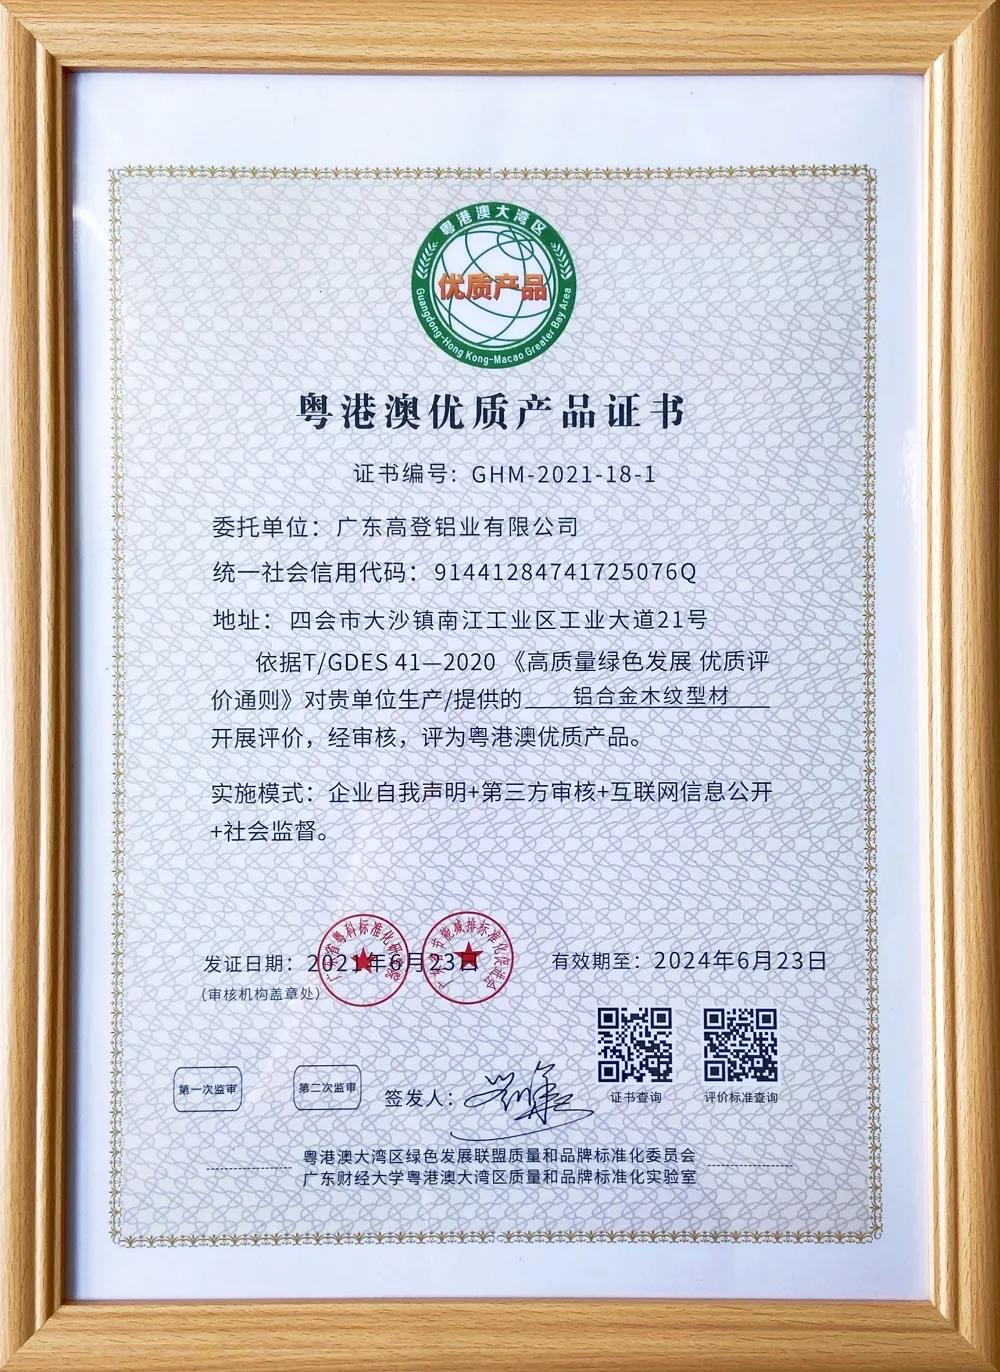 2021 Won "Guangdong, Hong Kong and Macao Quality Product Certificate"